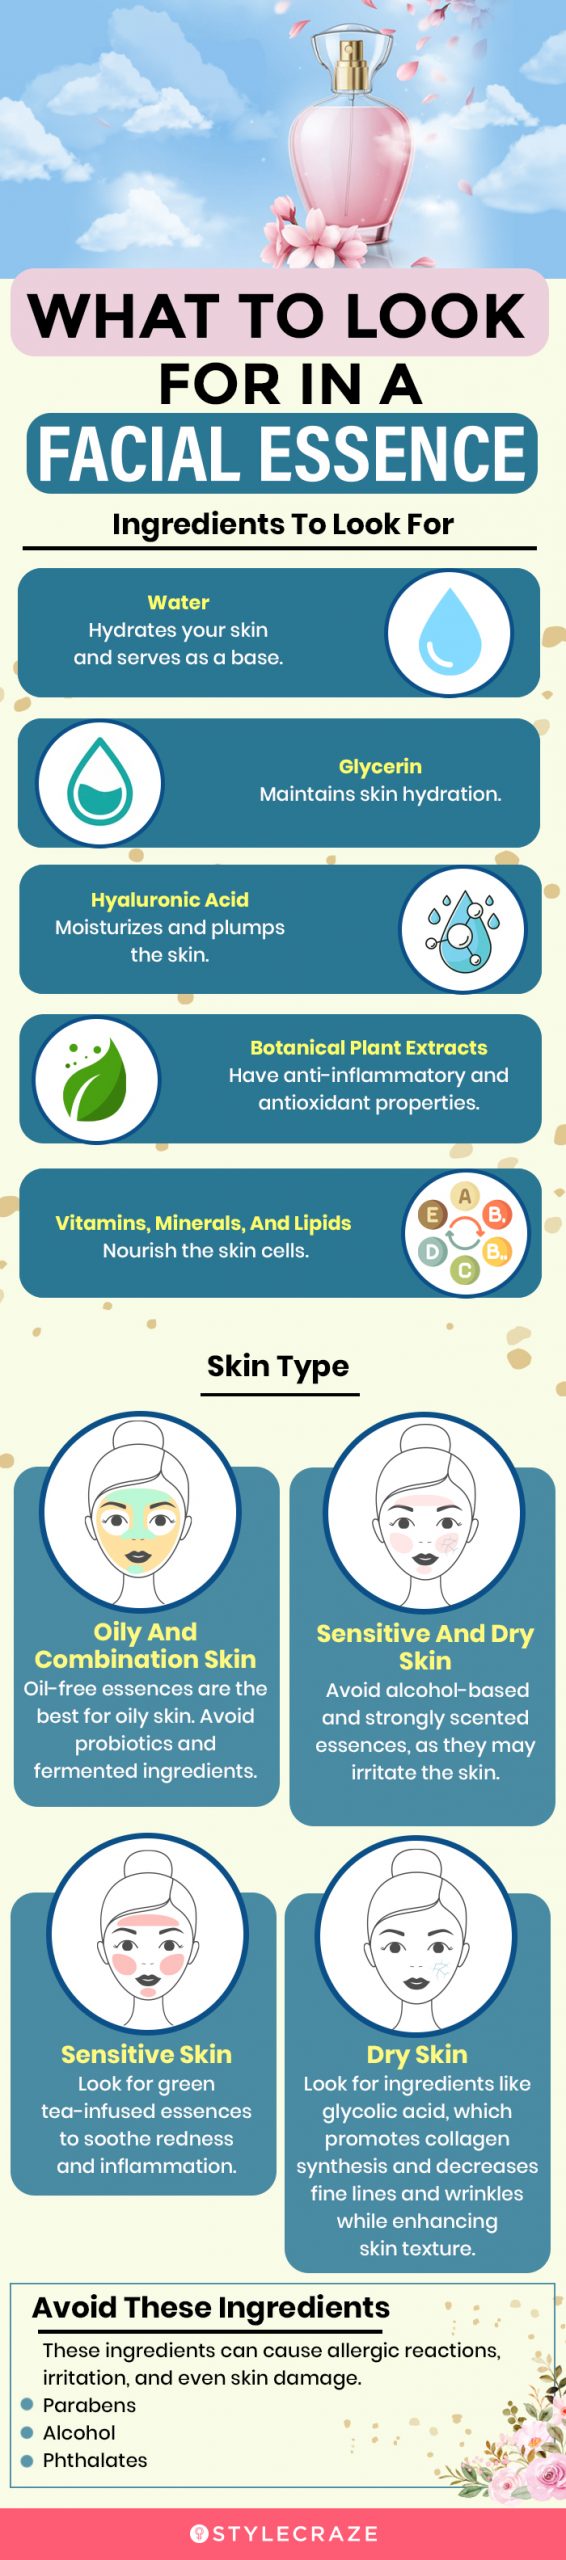 What To Look For In A Facial Essence (infographic)